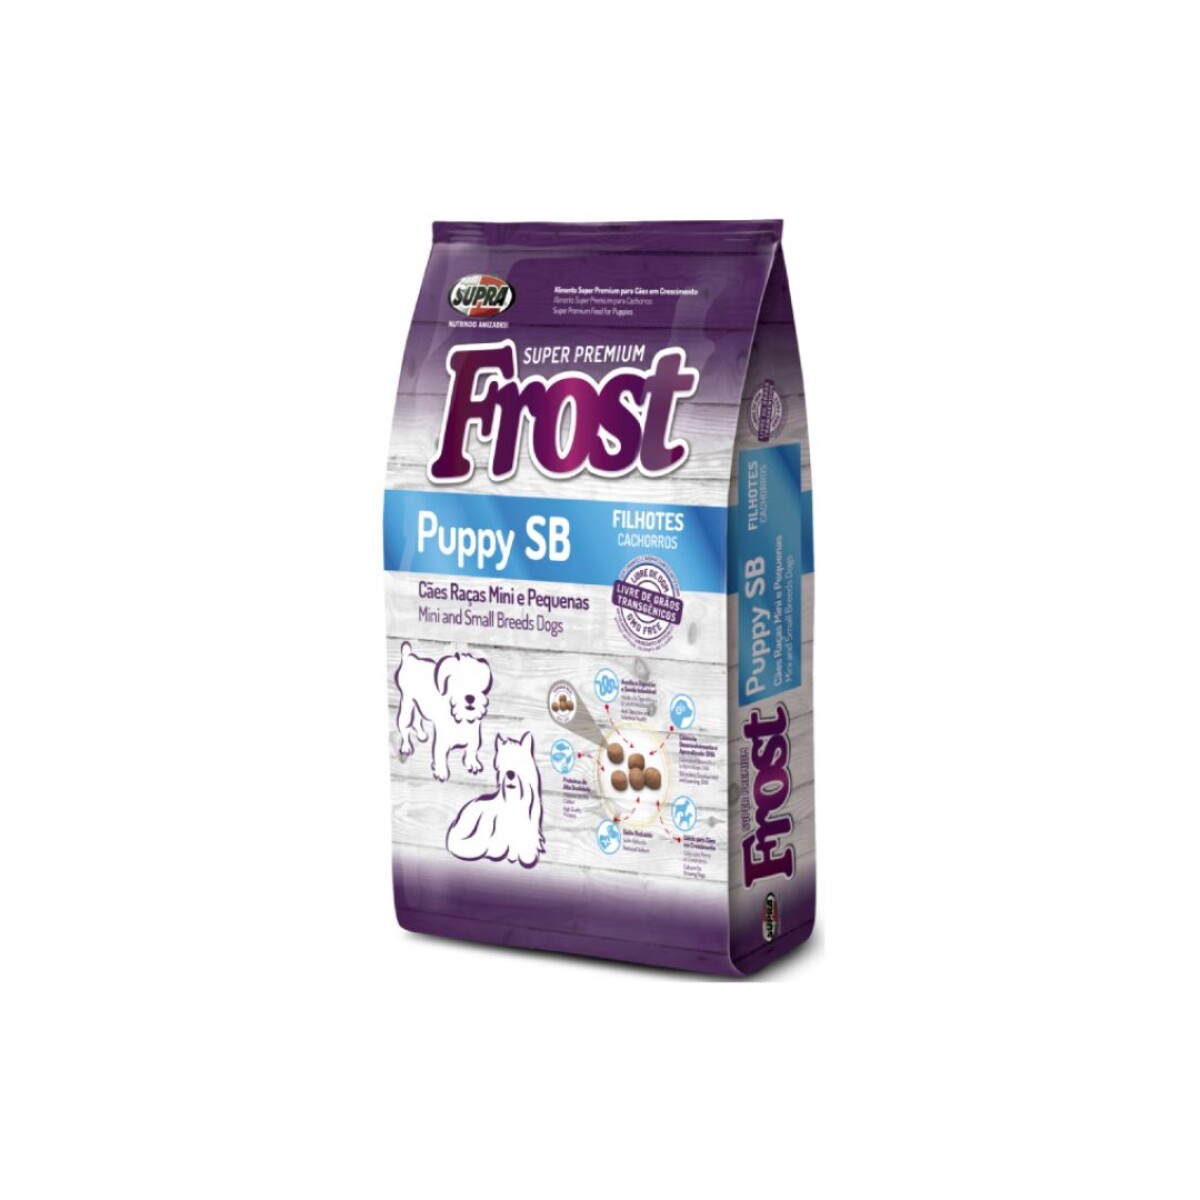 FROST PUPPY SB 10,1 KG - Unica 